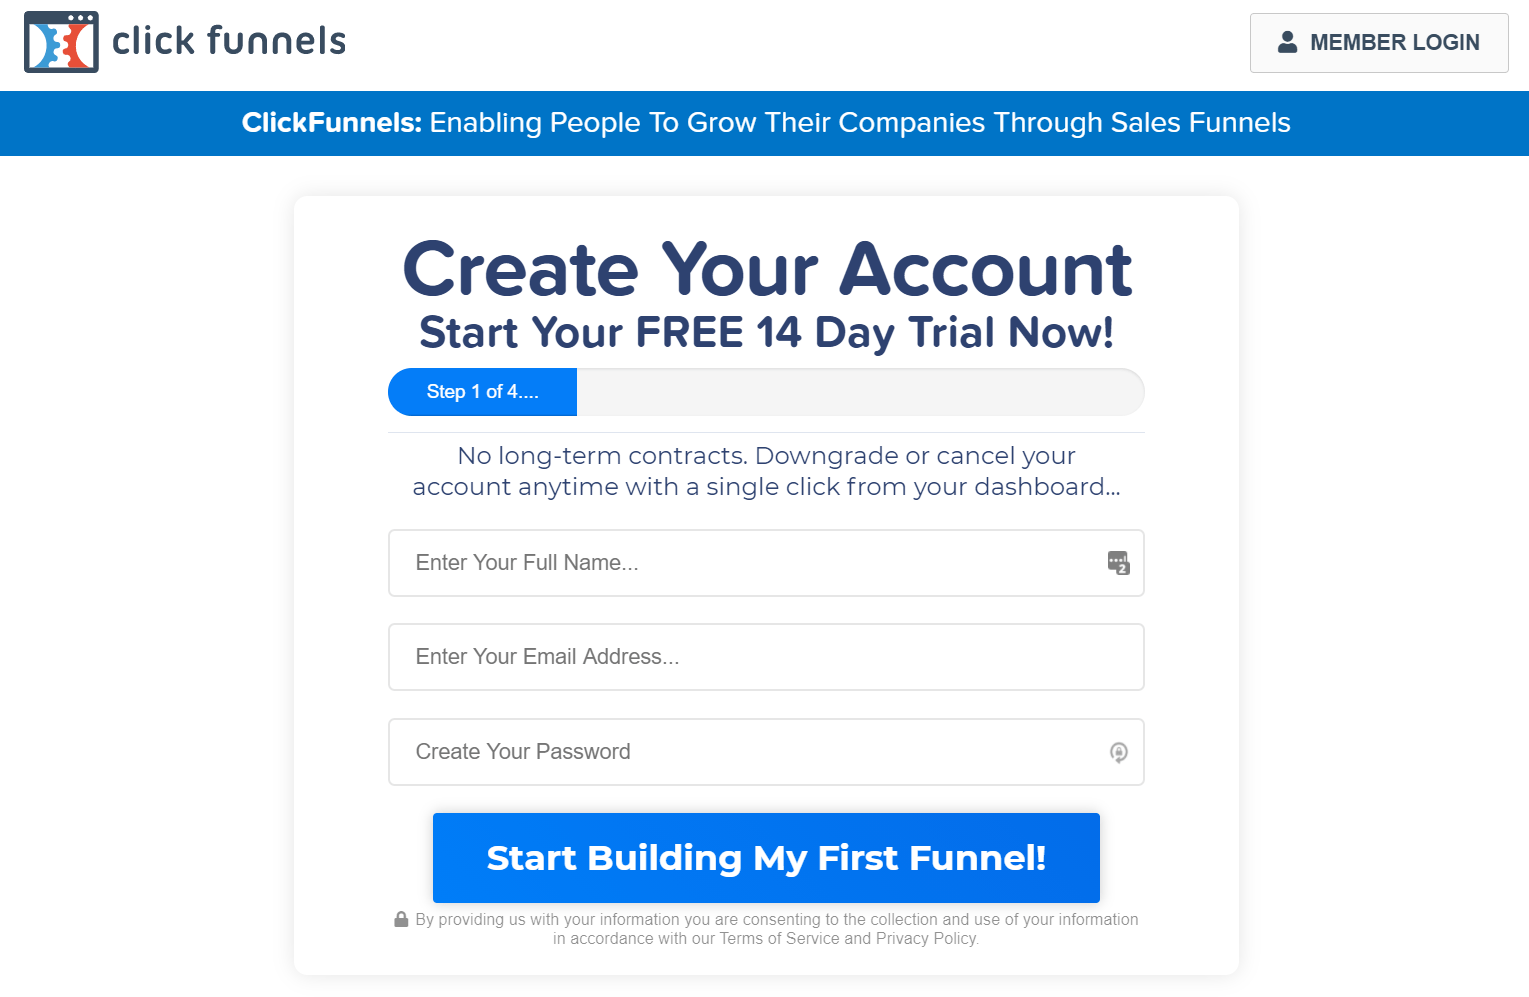 clickfunnels 14 day trial